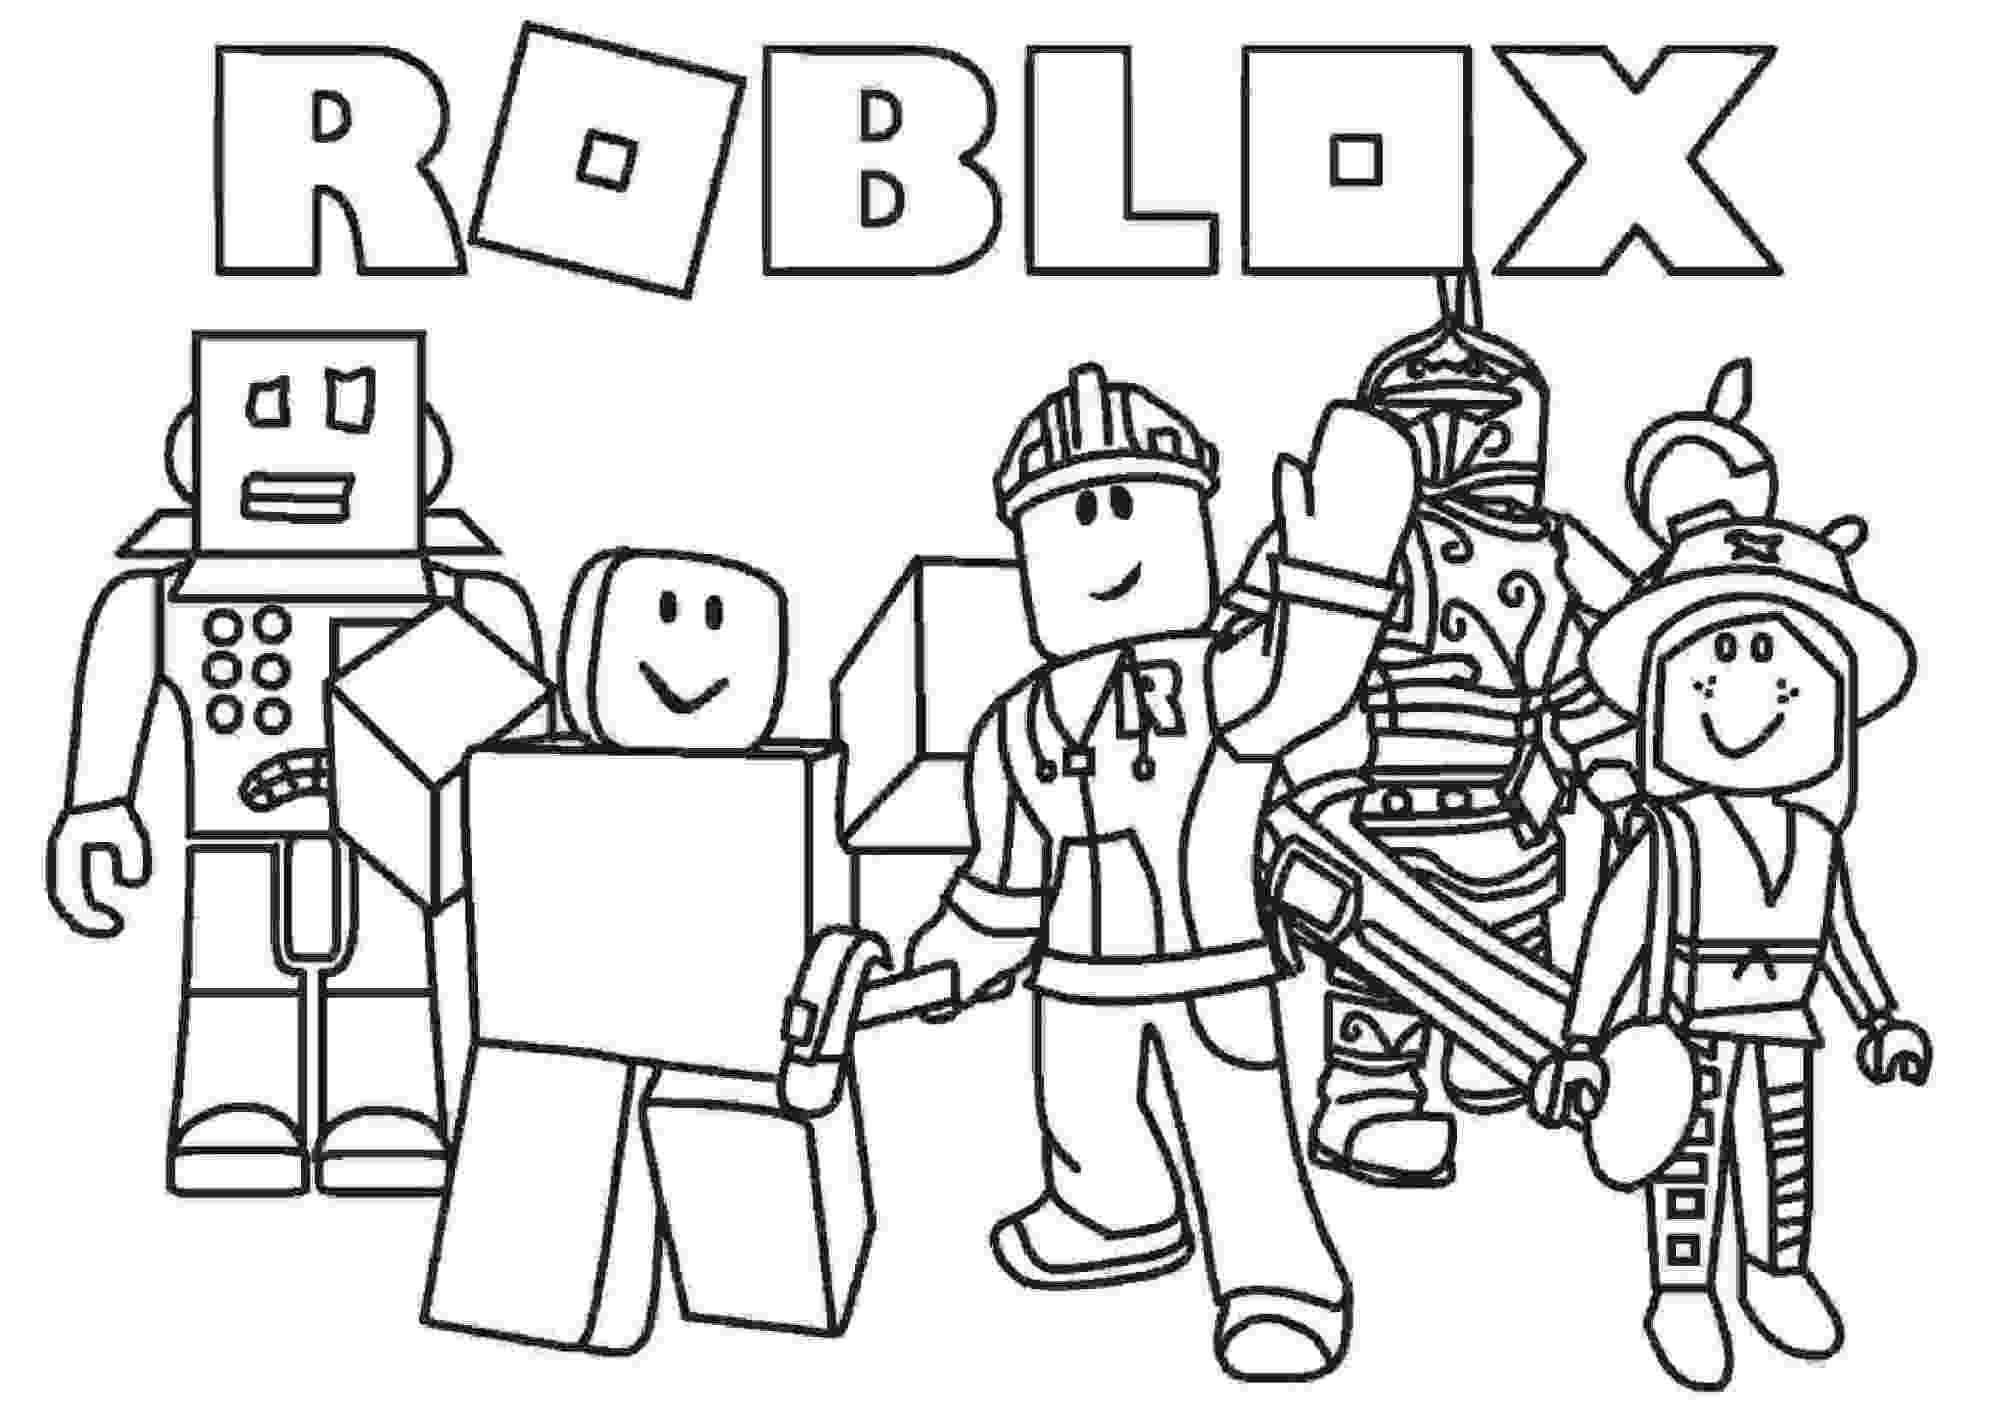 Roblox team protects the earth Coloring Pages Lego Coloring Pages